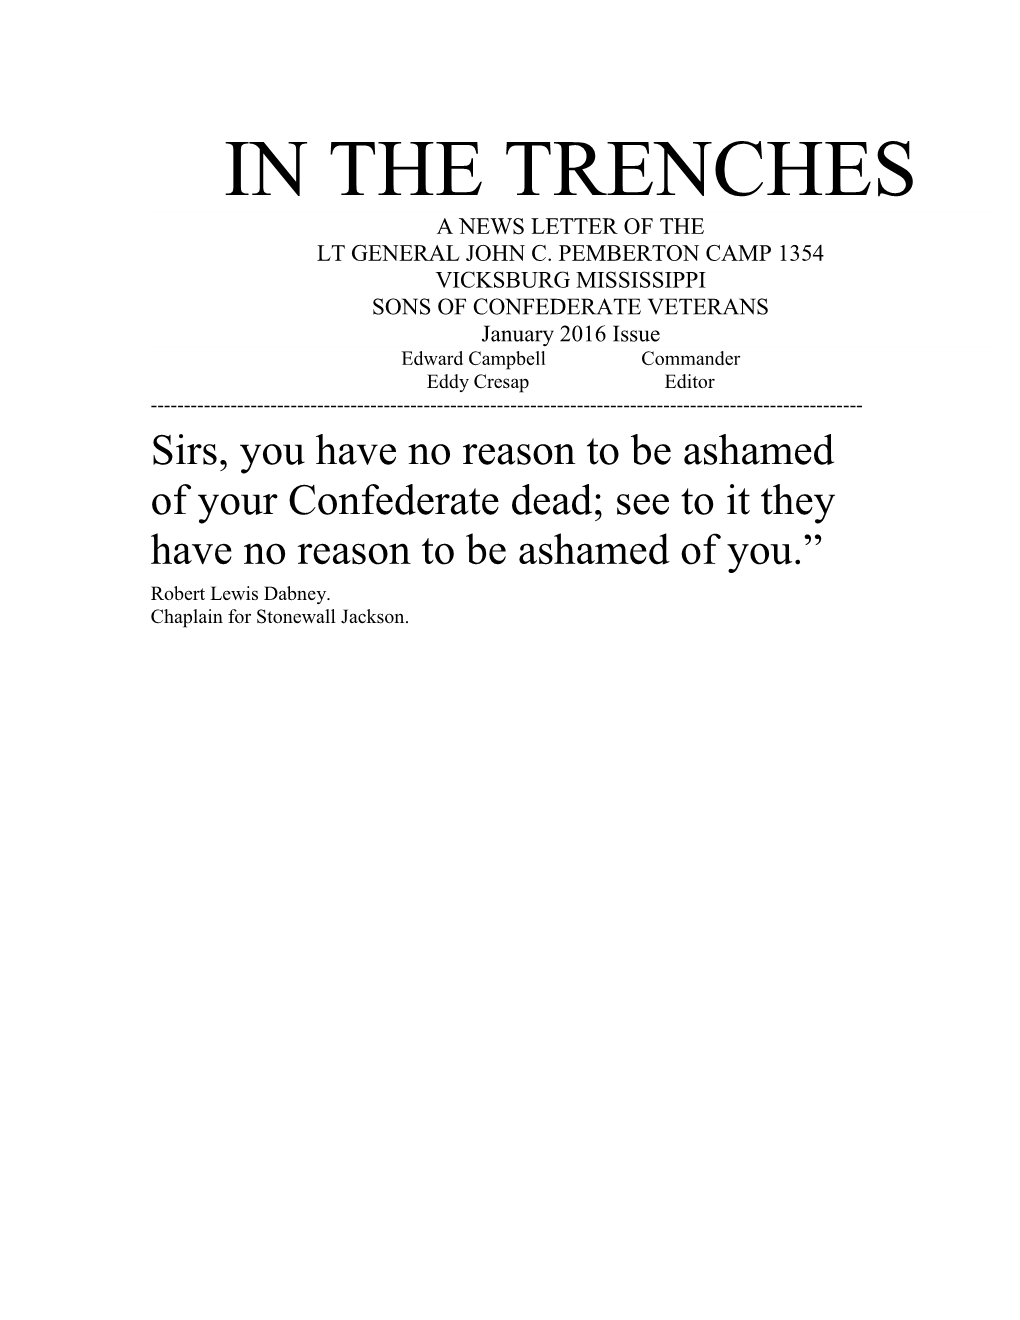 In the Trenches a News Letter of the Lt General John C